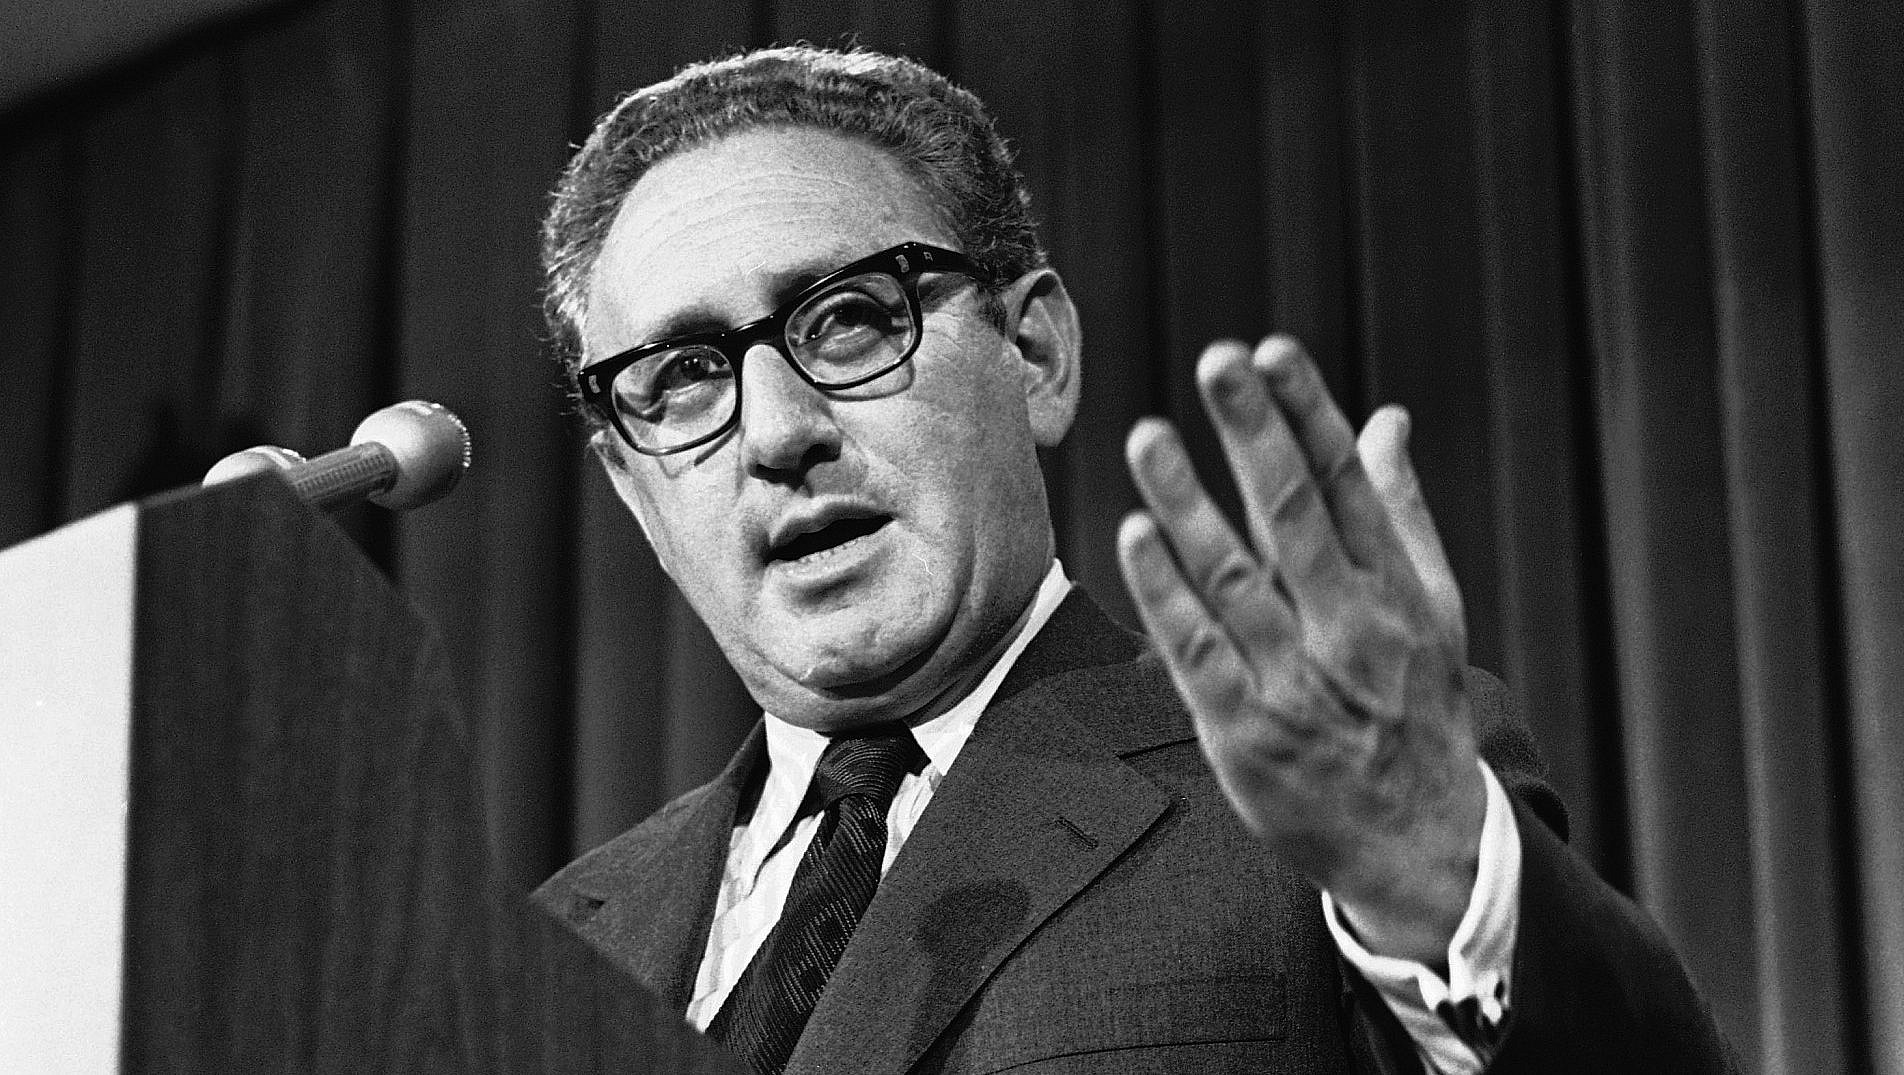 Vietnam, the Middle East, regime coups, invasions: Henry Kissinger's major moments | The Times of Israel